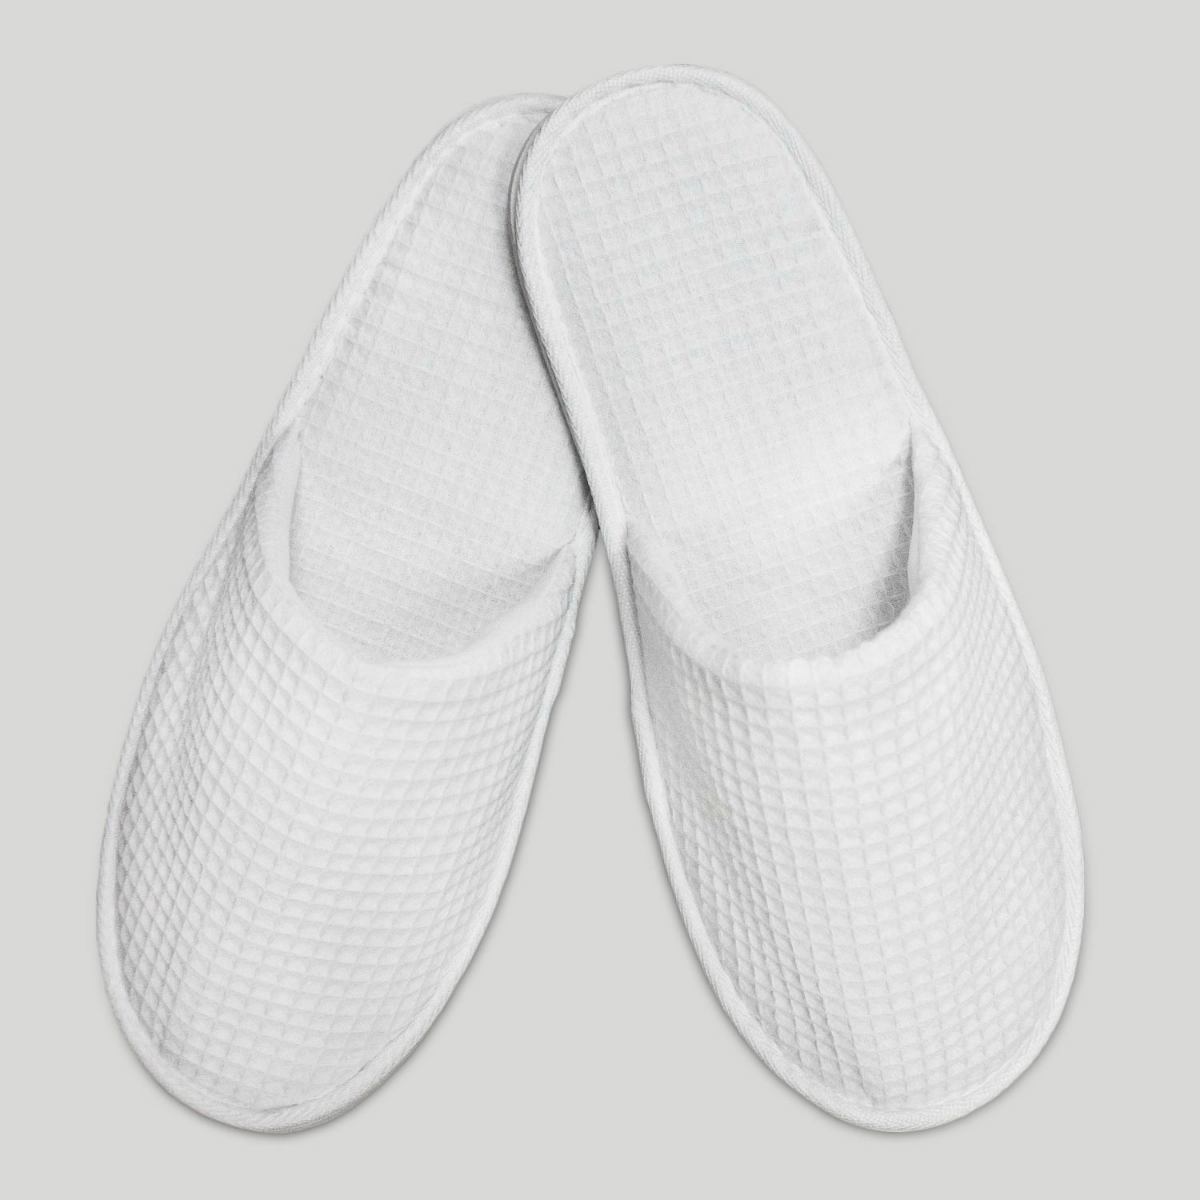 white closed toe slippers | Things To Consider When Purchasing A Men's Robe | men's robe | men's robe silk